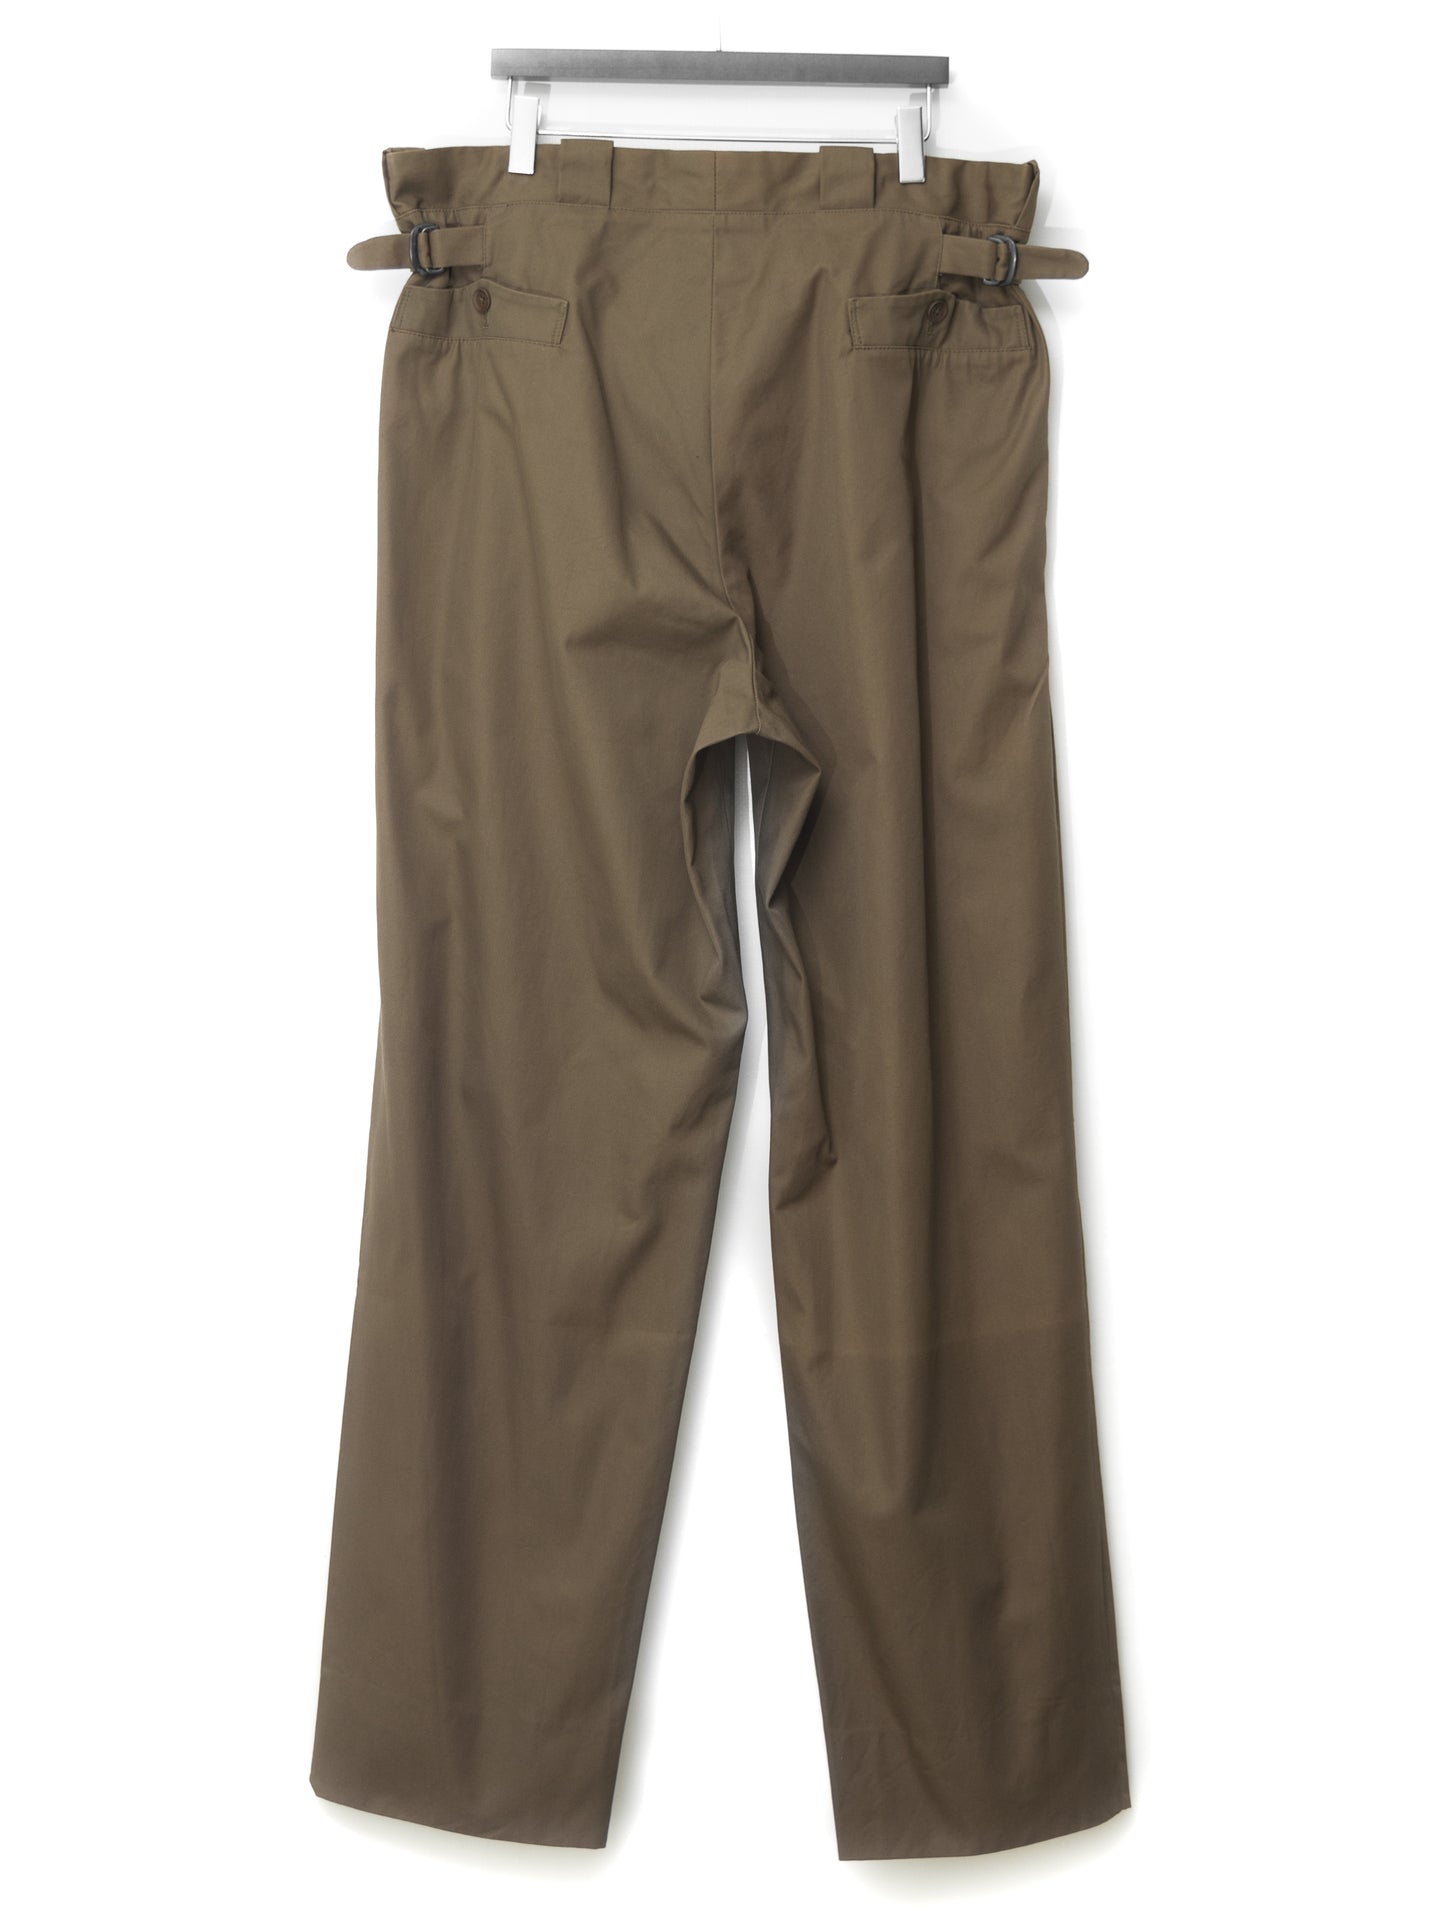 military trousers coyote ∙ cotton ∙ medium